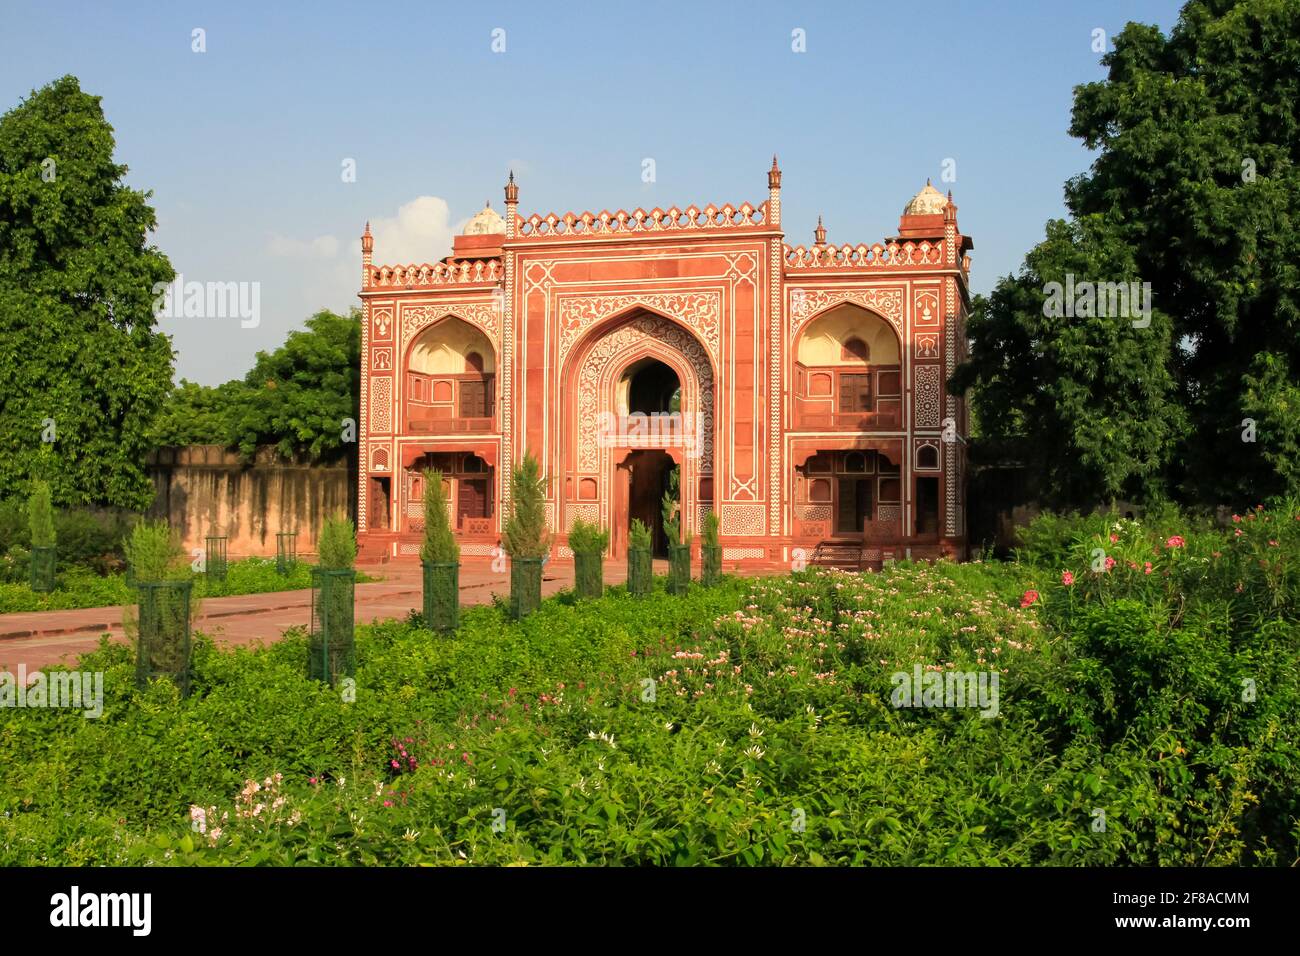 Red entrance building at Itmad-Ud-Daulah or baby Taj Mahal in Agra India against blue sky Stock Photo